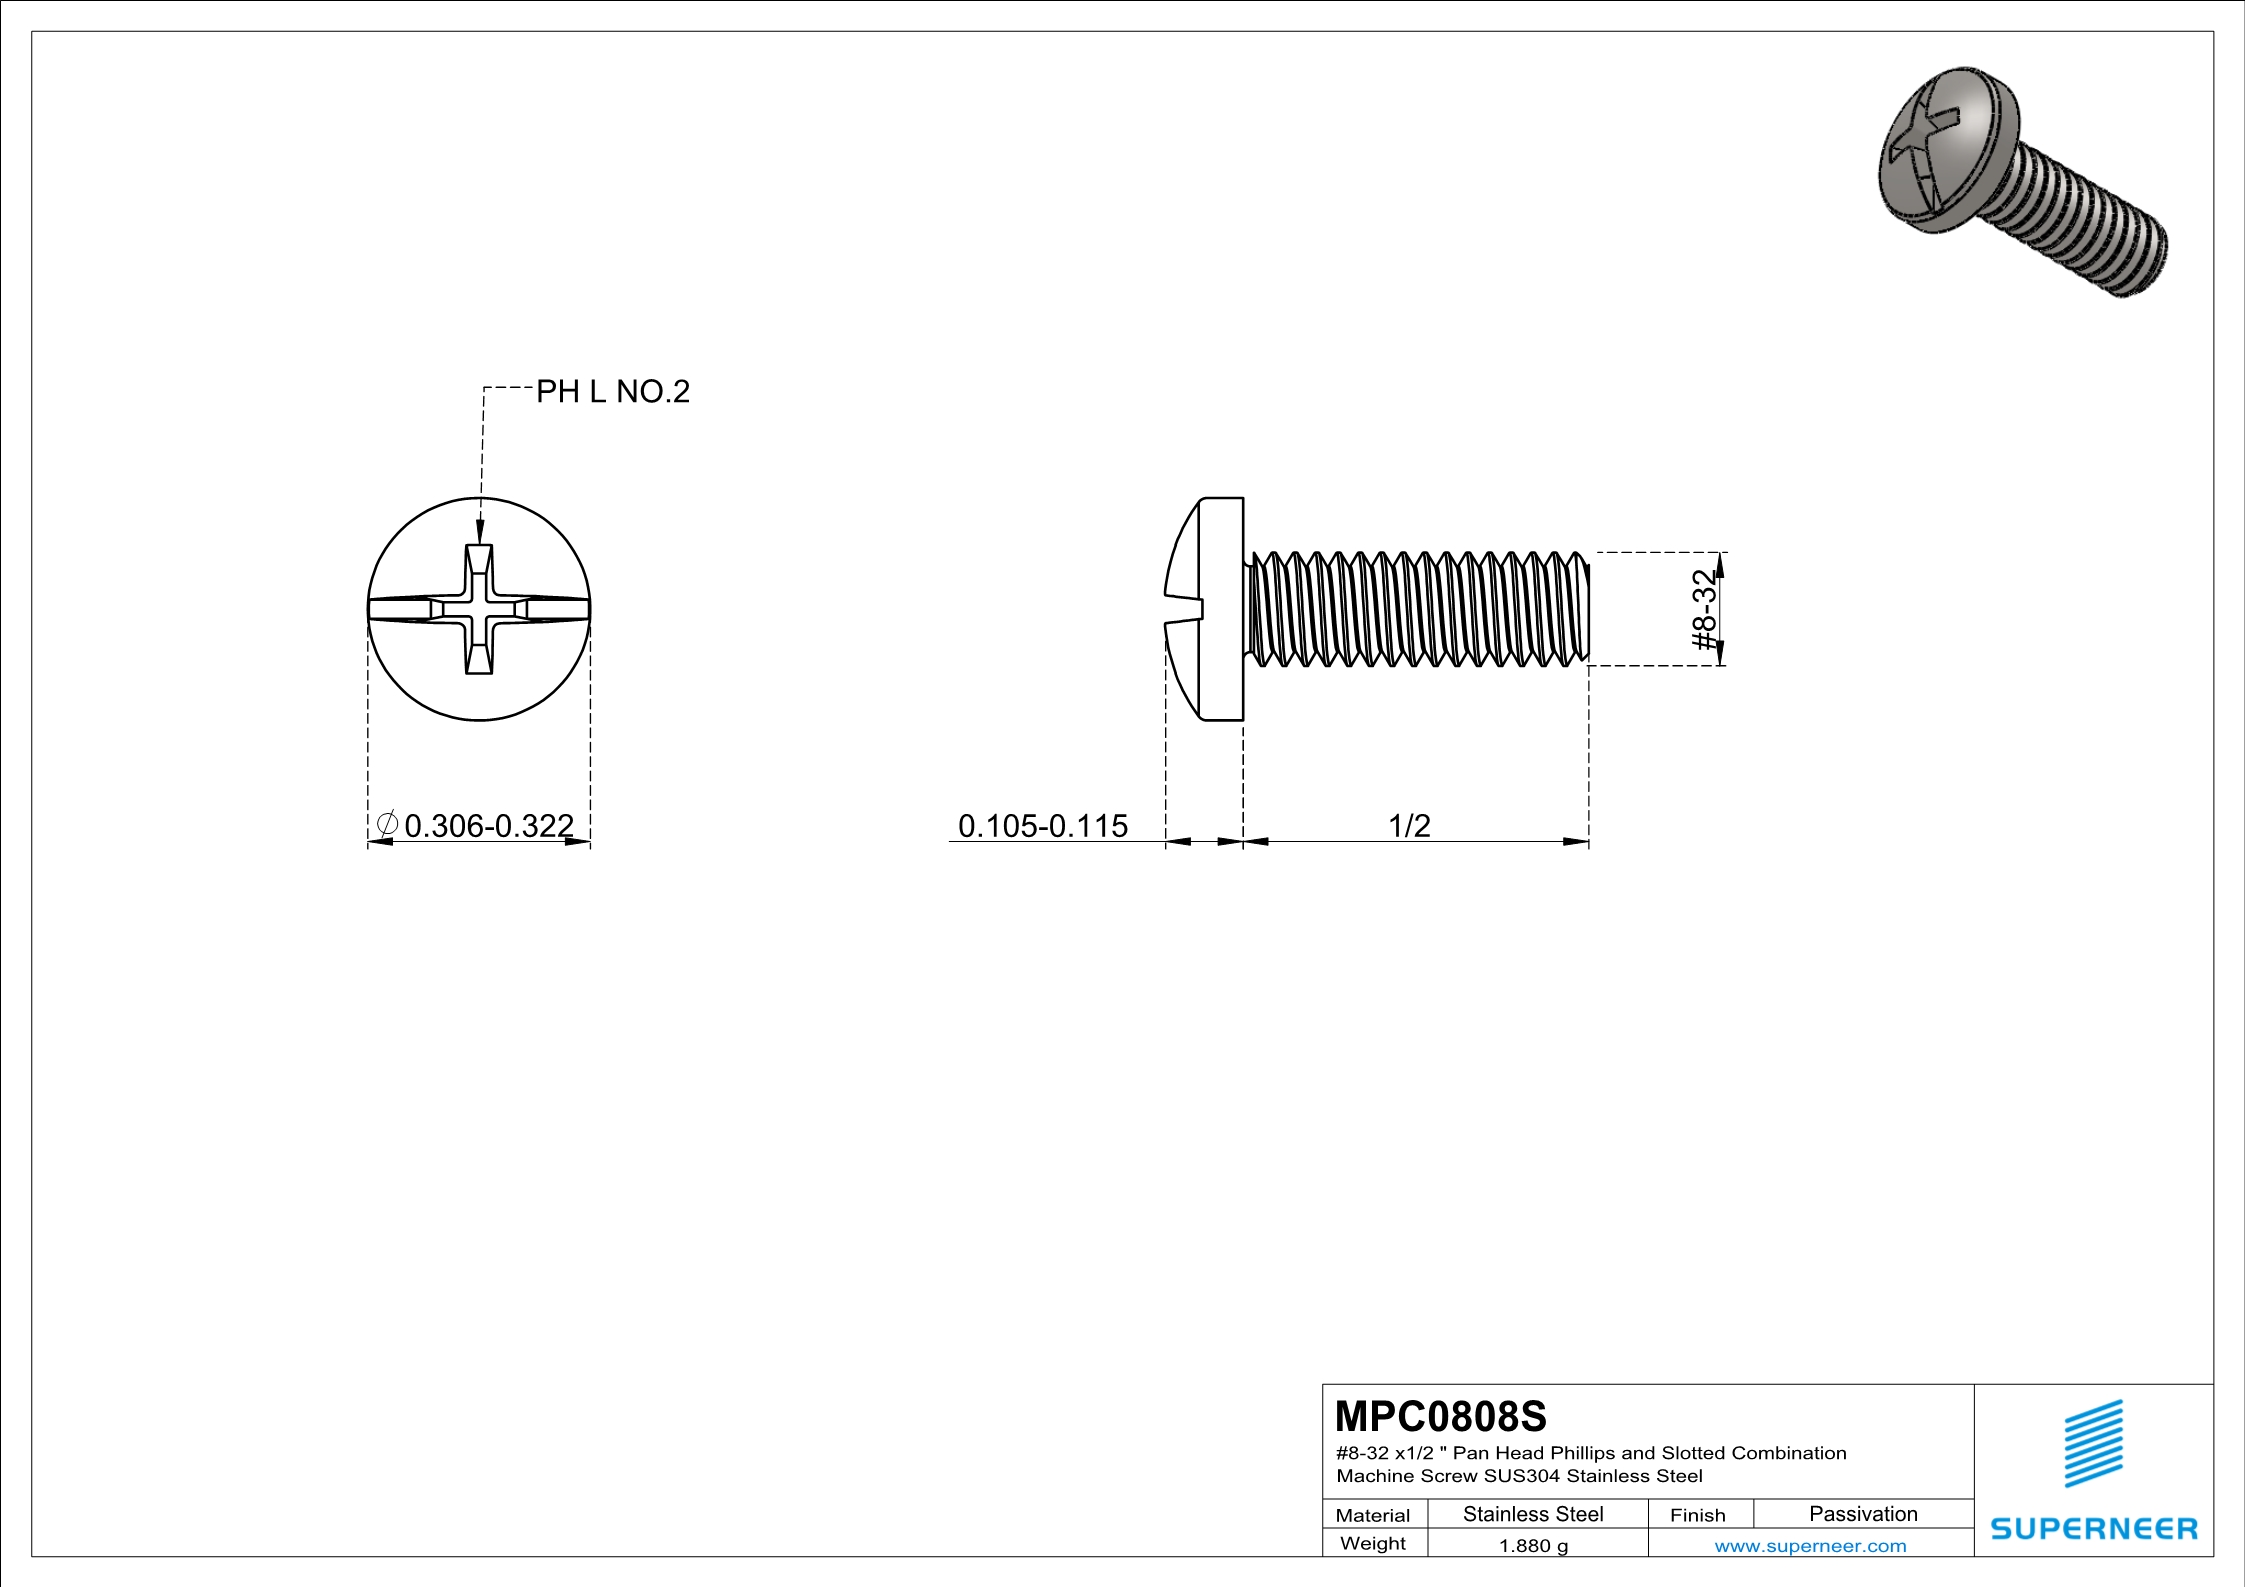 8-32 x 1/2" Pan Head Phillips and Slotted Combination Machine Screw SUS304 Stainless Steel Inox